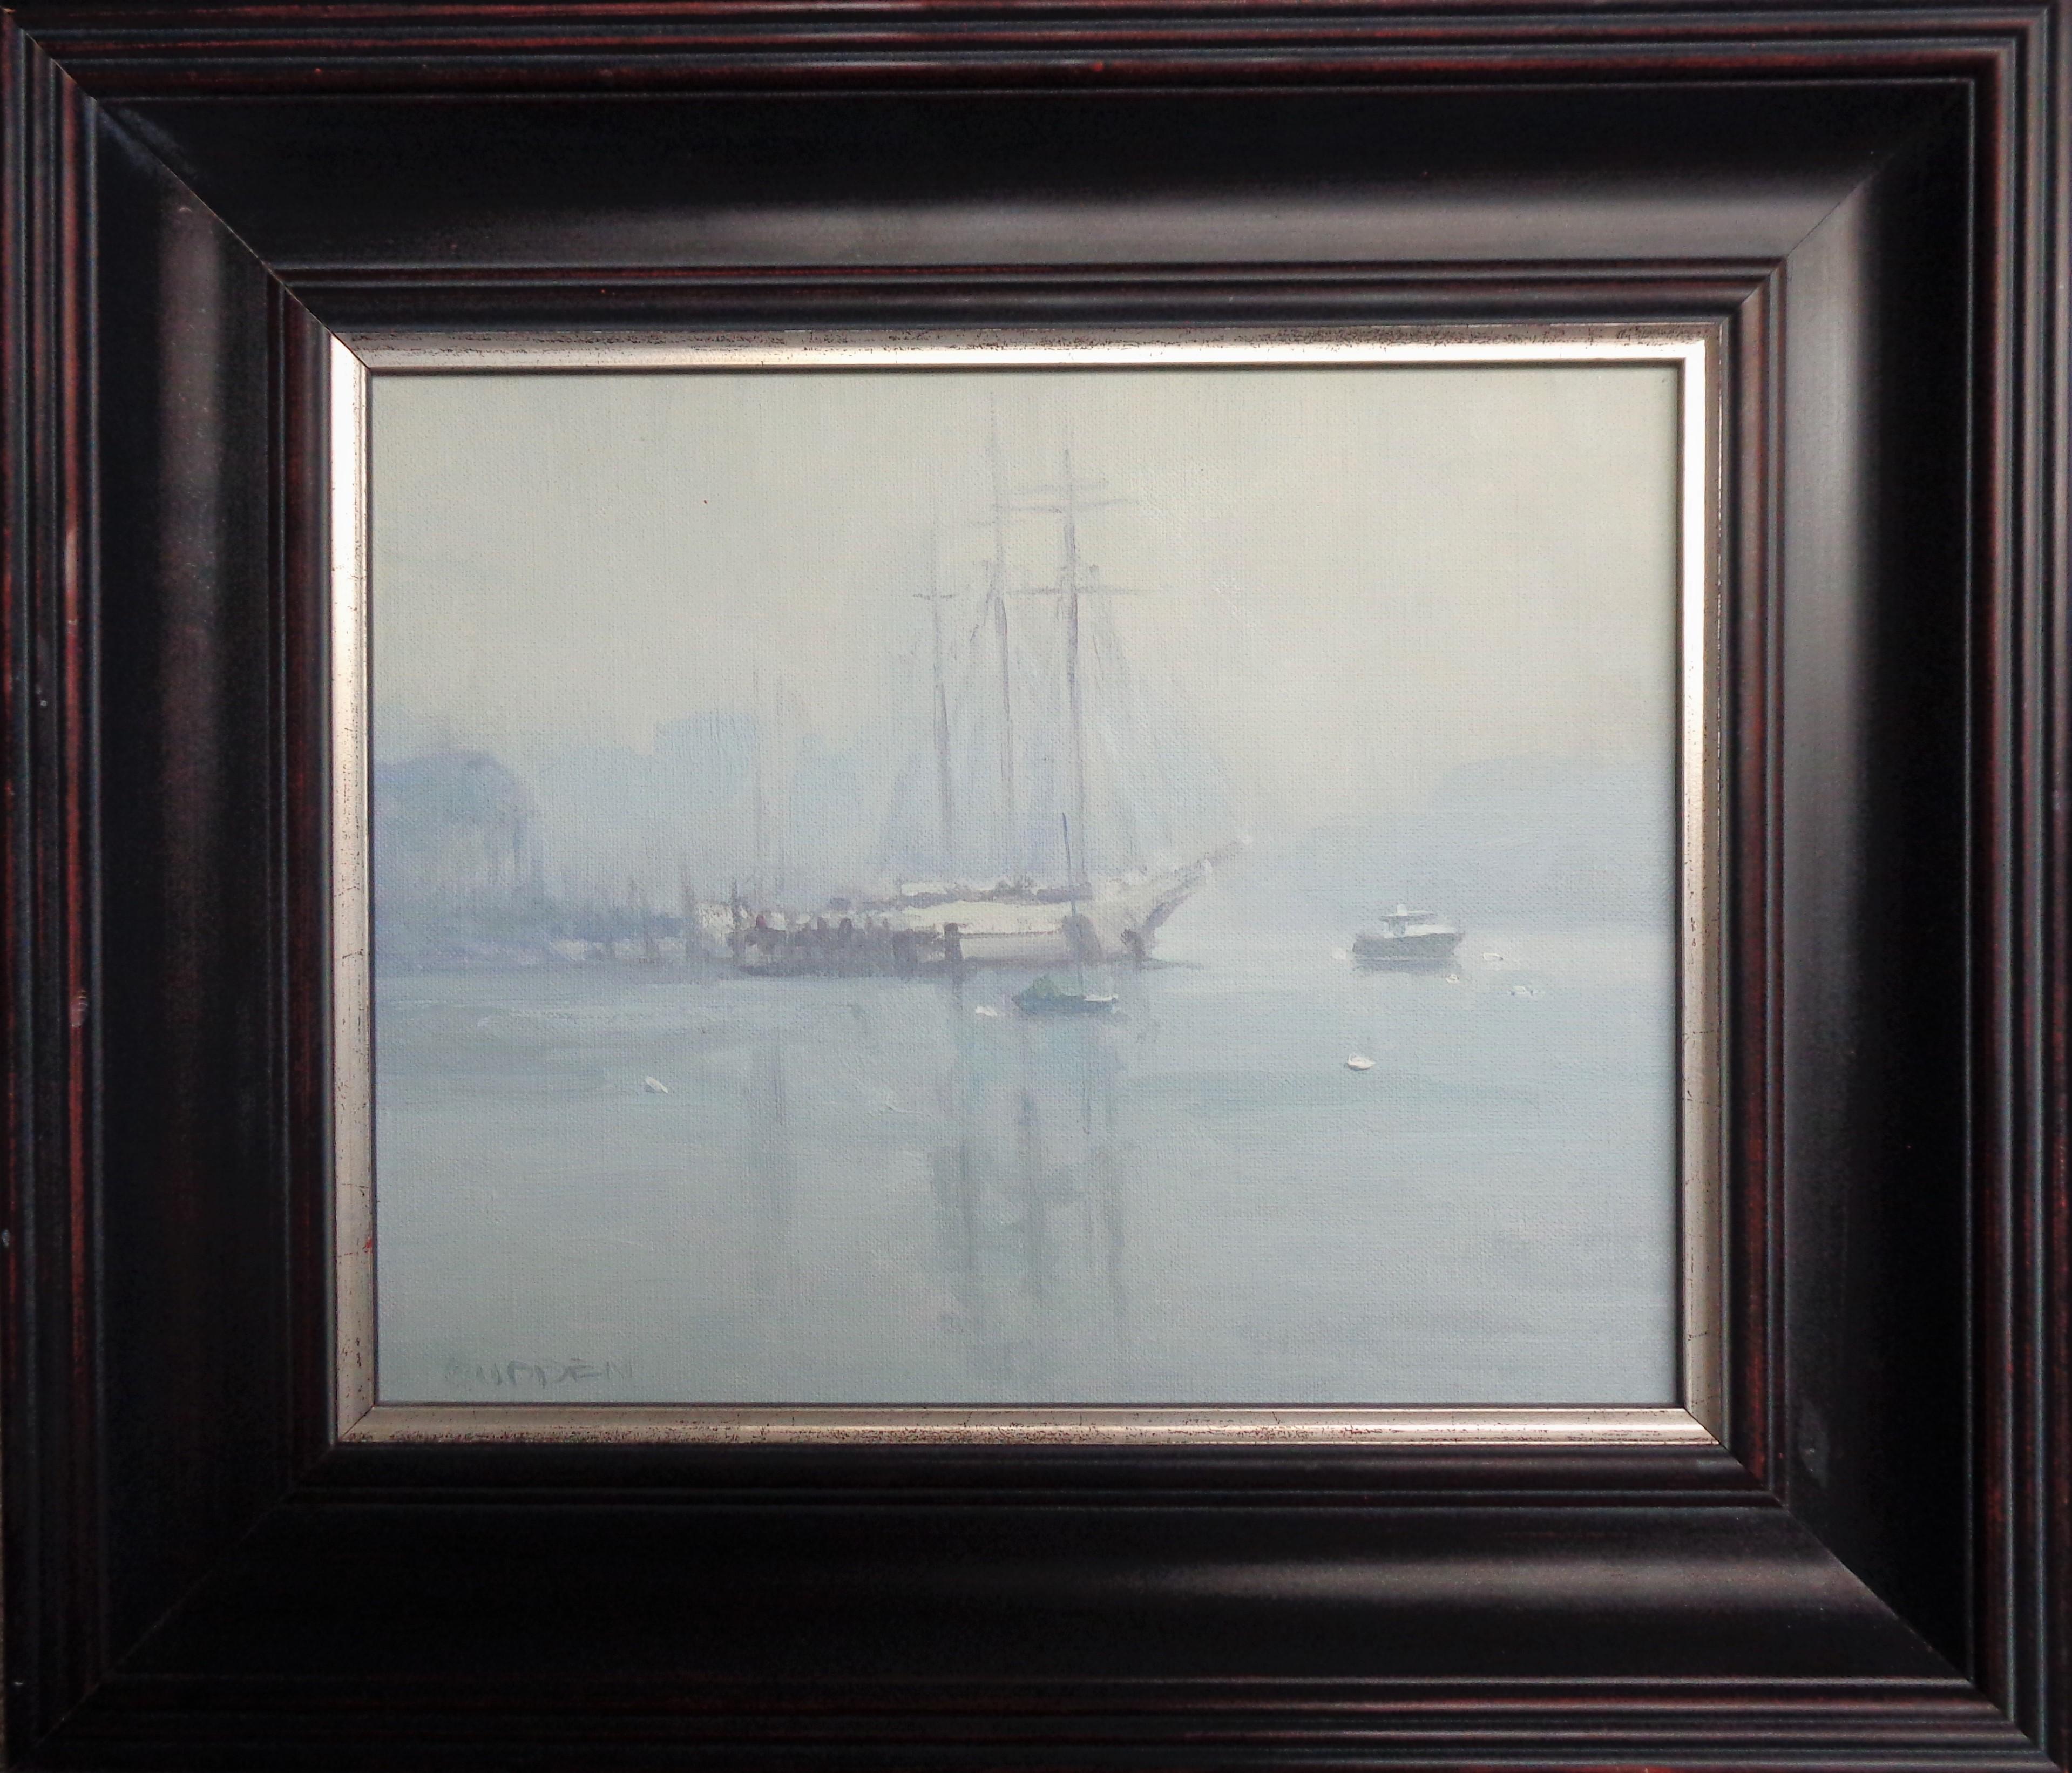 Mystic Ghosts is a plein air painting done at the Mystic Seaport by award winning contemporary artist Michael Budden that I have kept until now as it is one of my favorite plein airs. It demonstrates an impressionistic style hence the looser brush